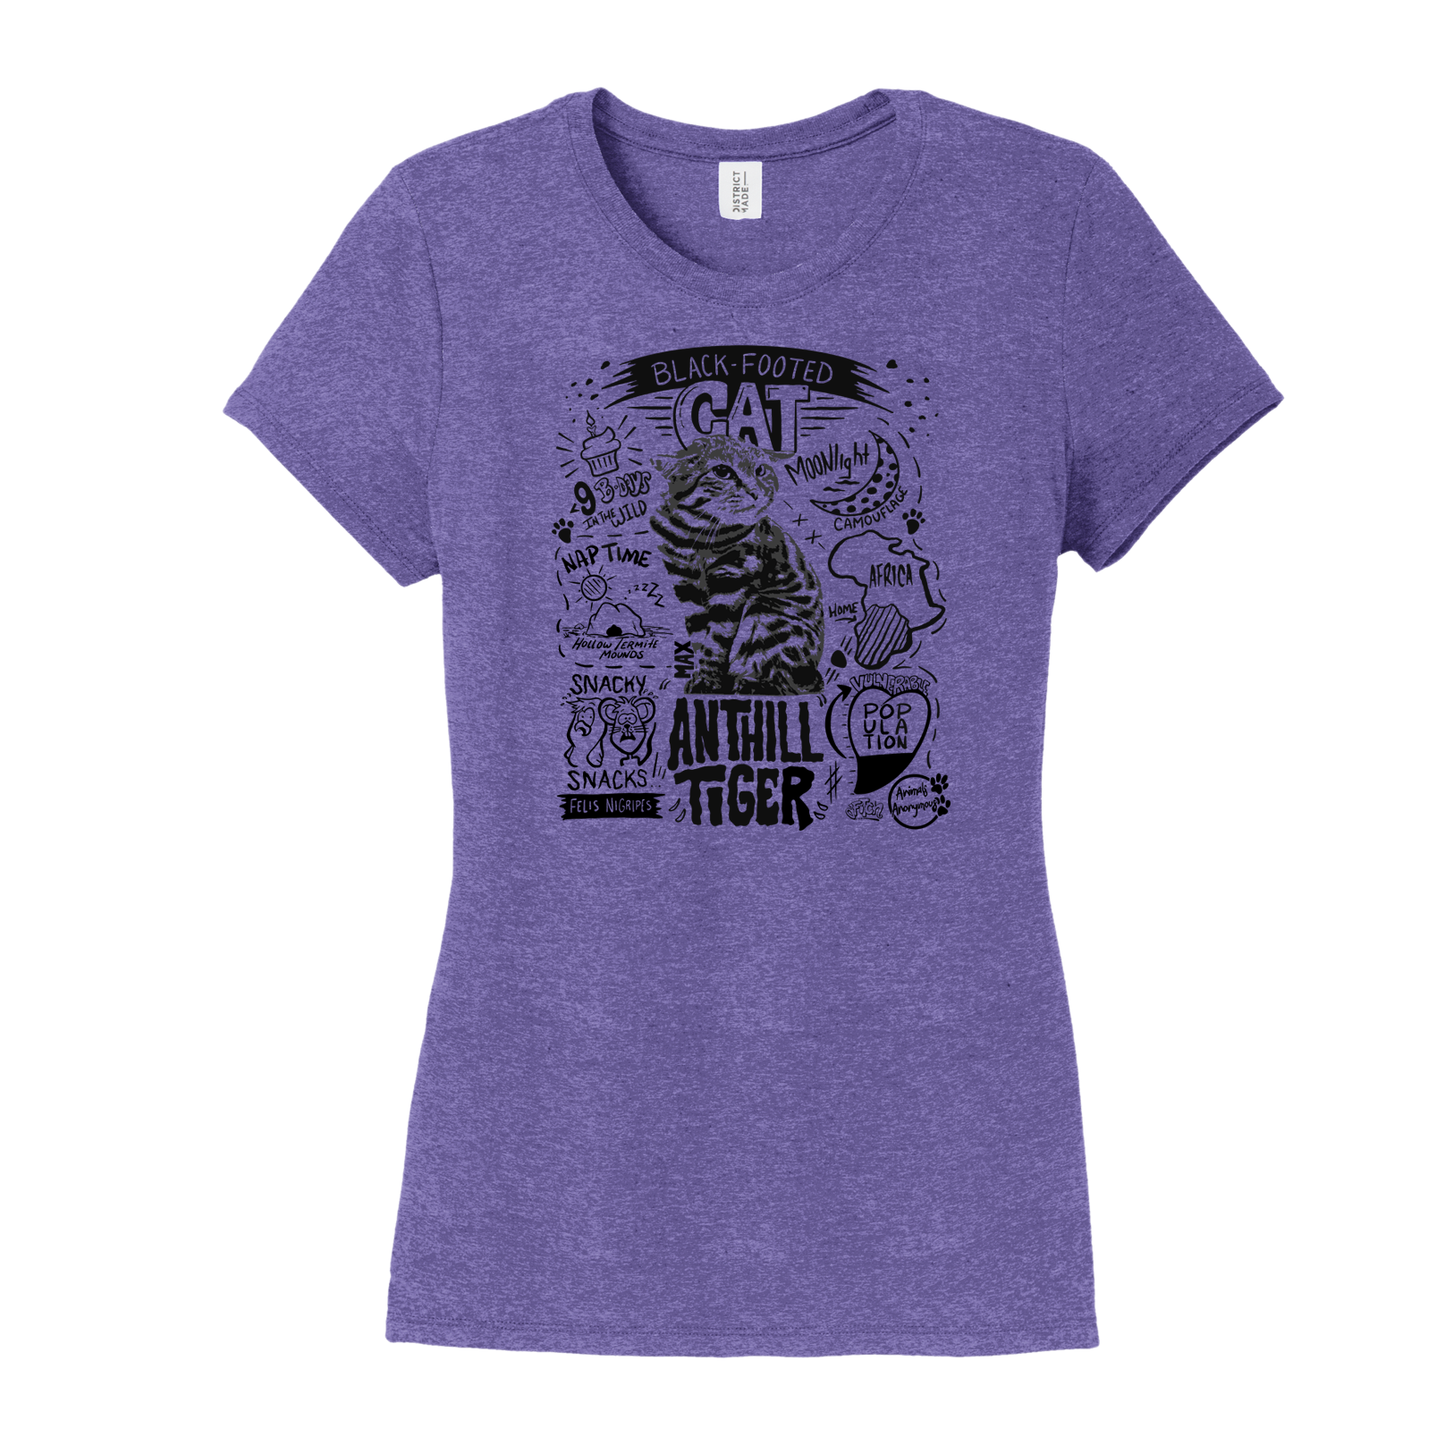 Black Footed Cat Fundraiser - Women's Tee (Pre order)